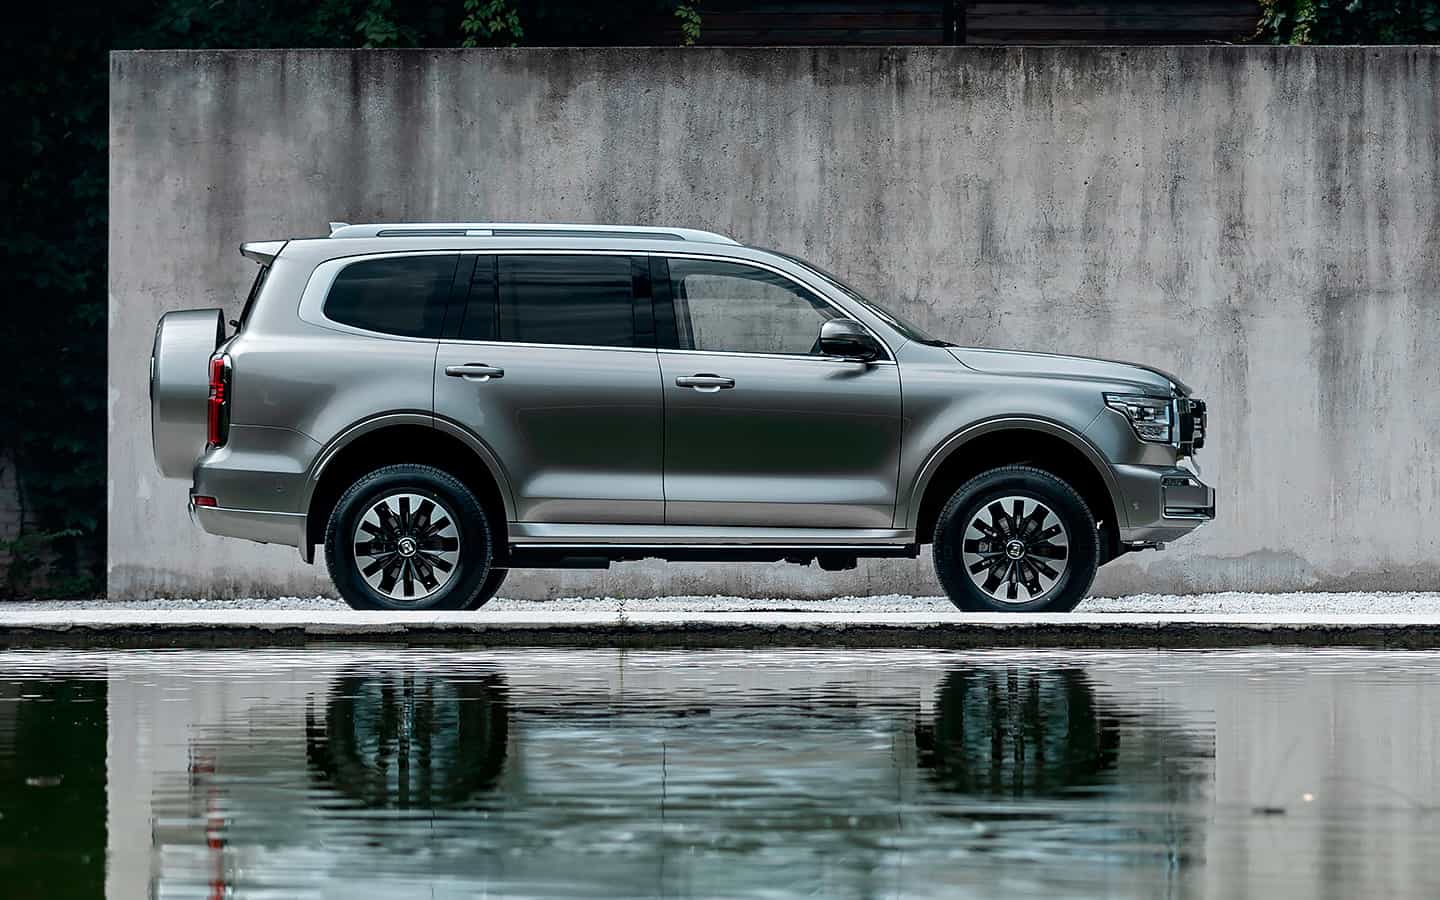 Great Wall showed off the big Tank 600 SUV